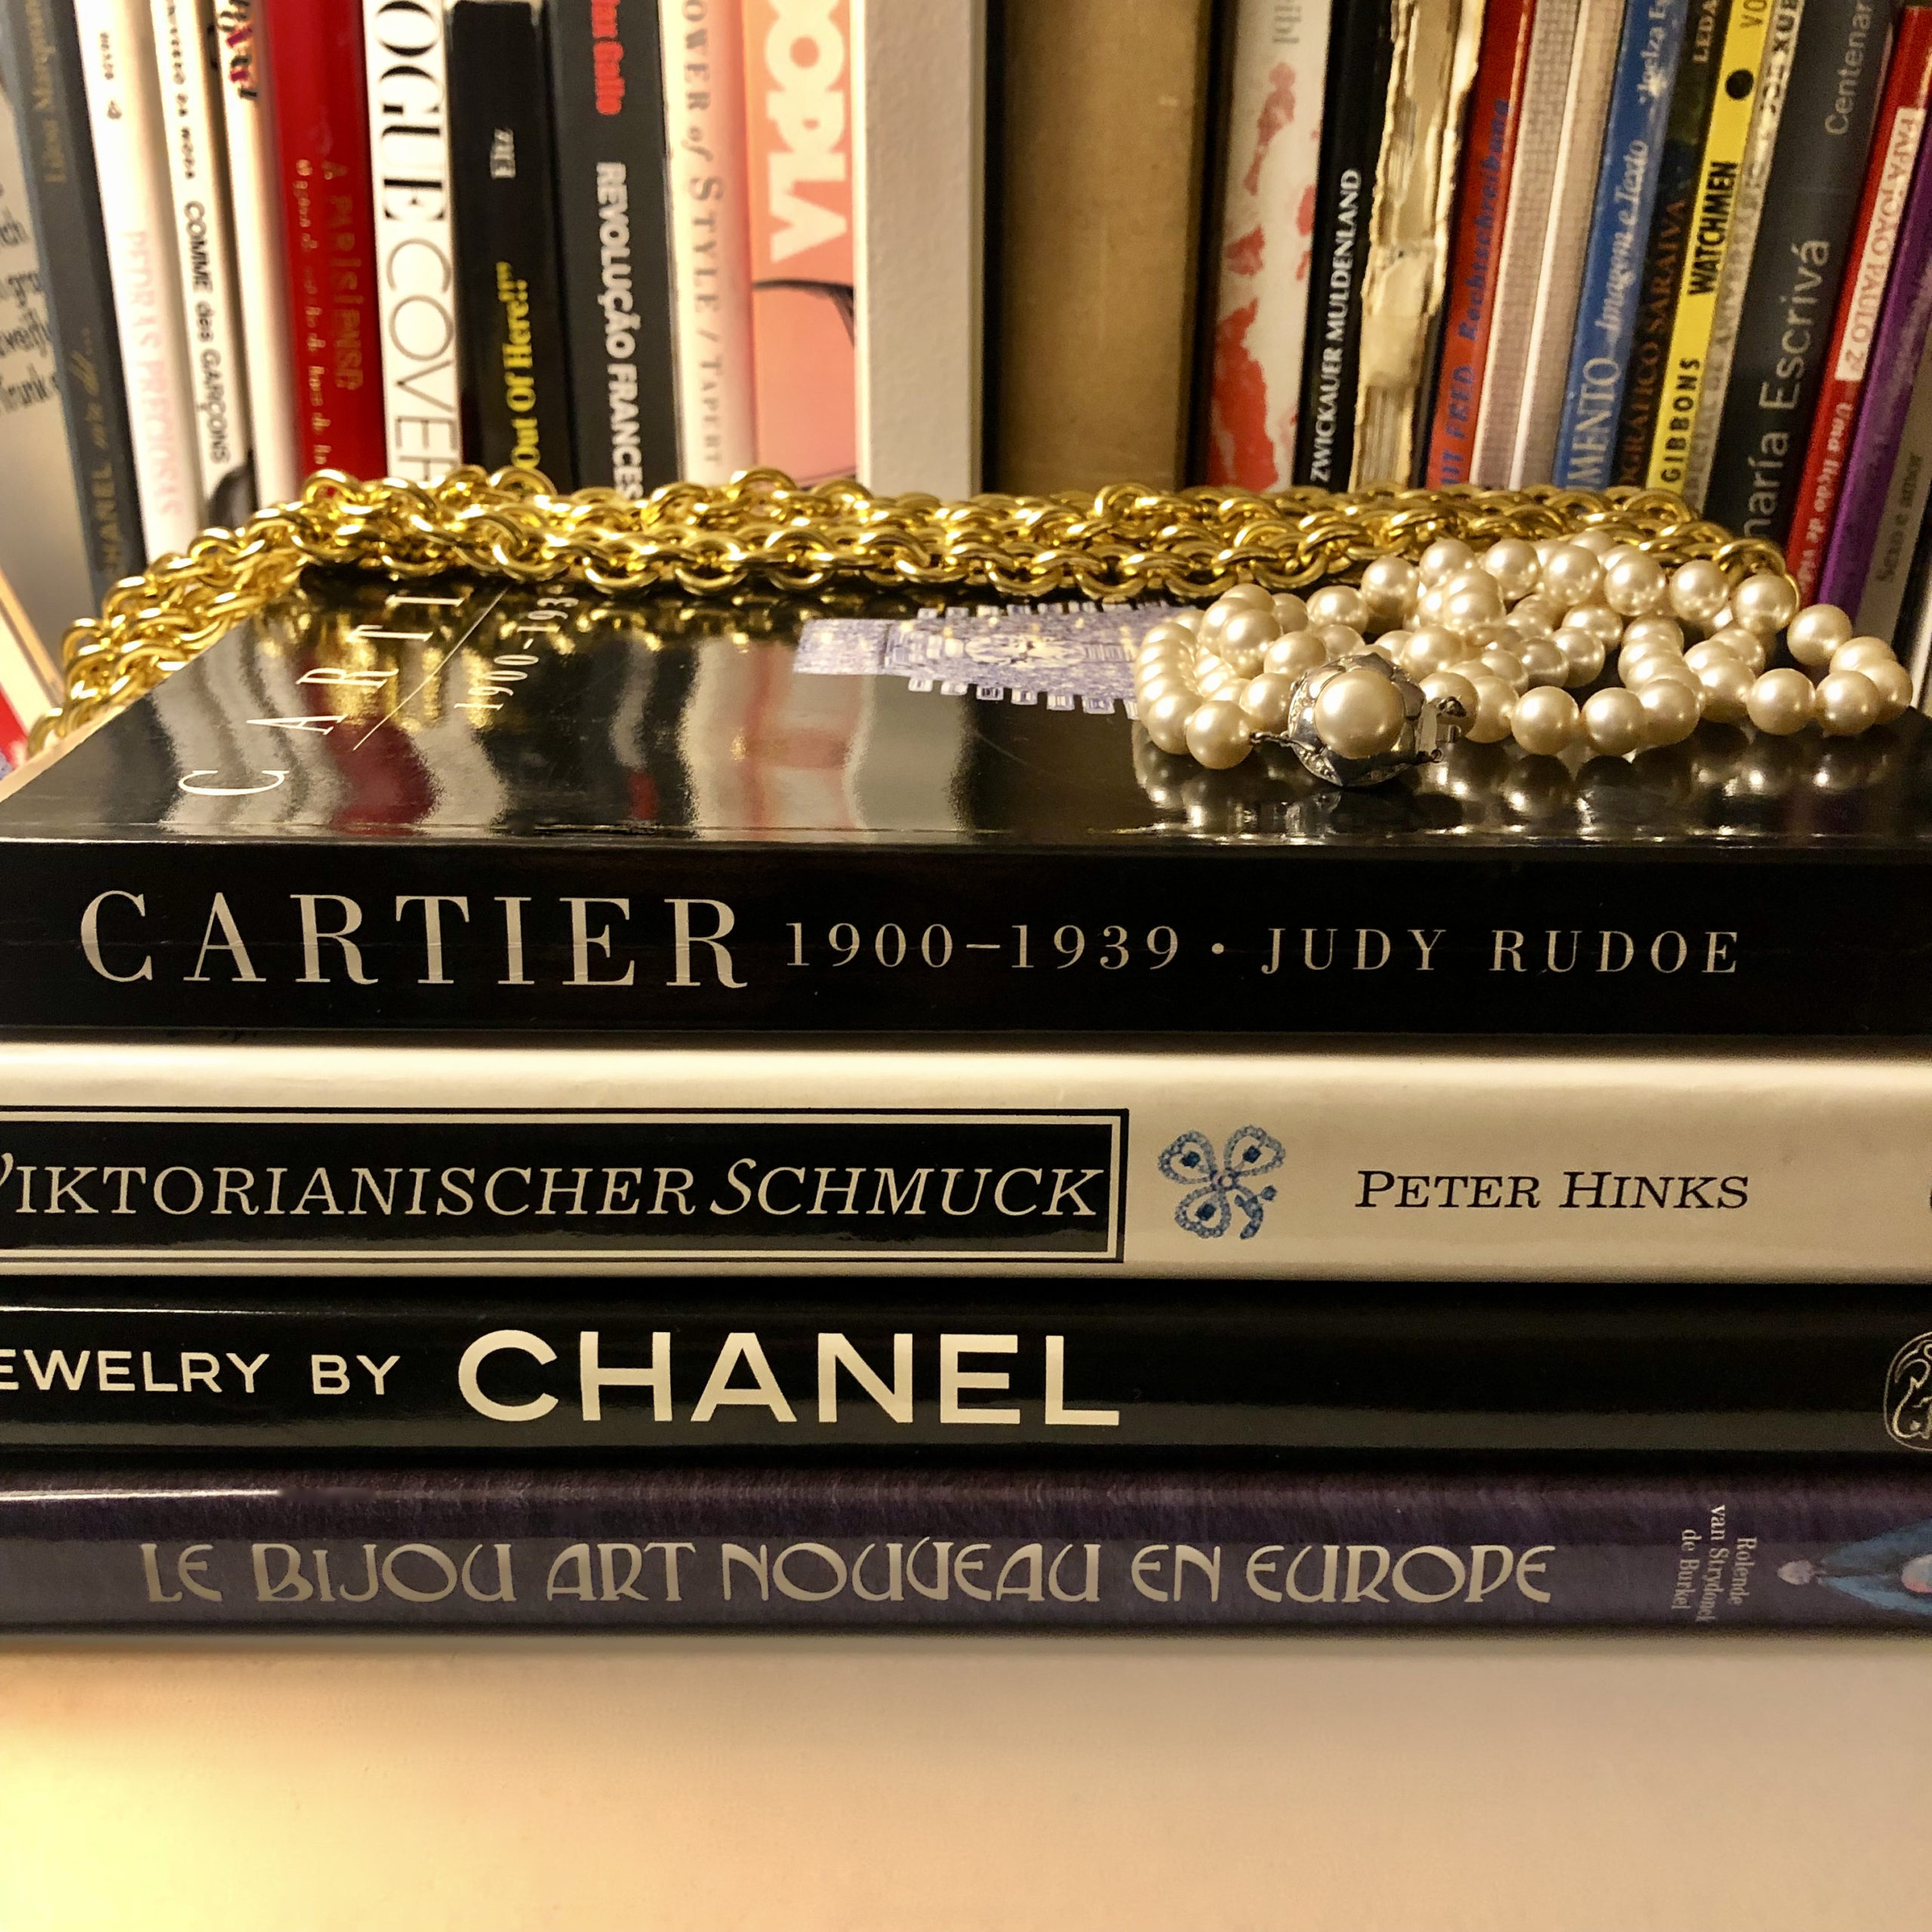 Books and jewellery pieces